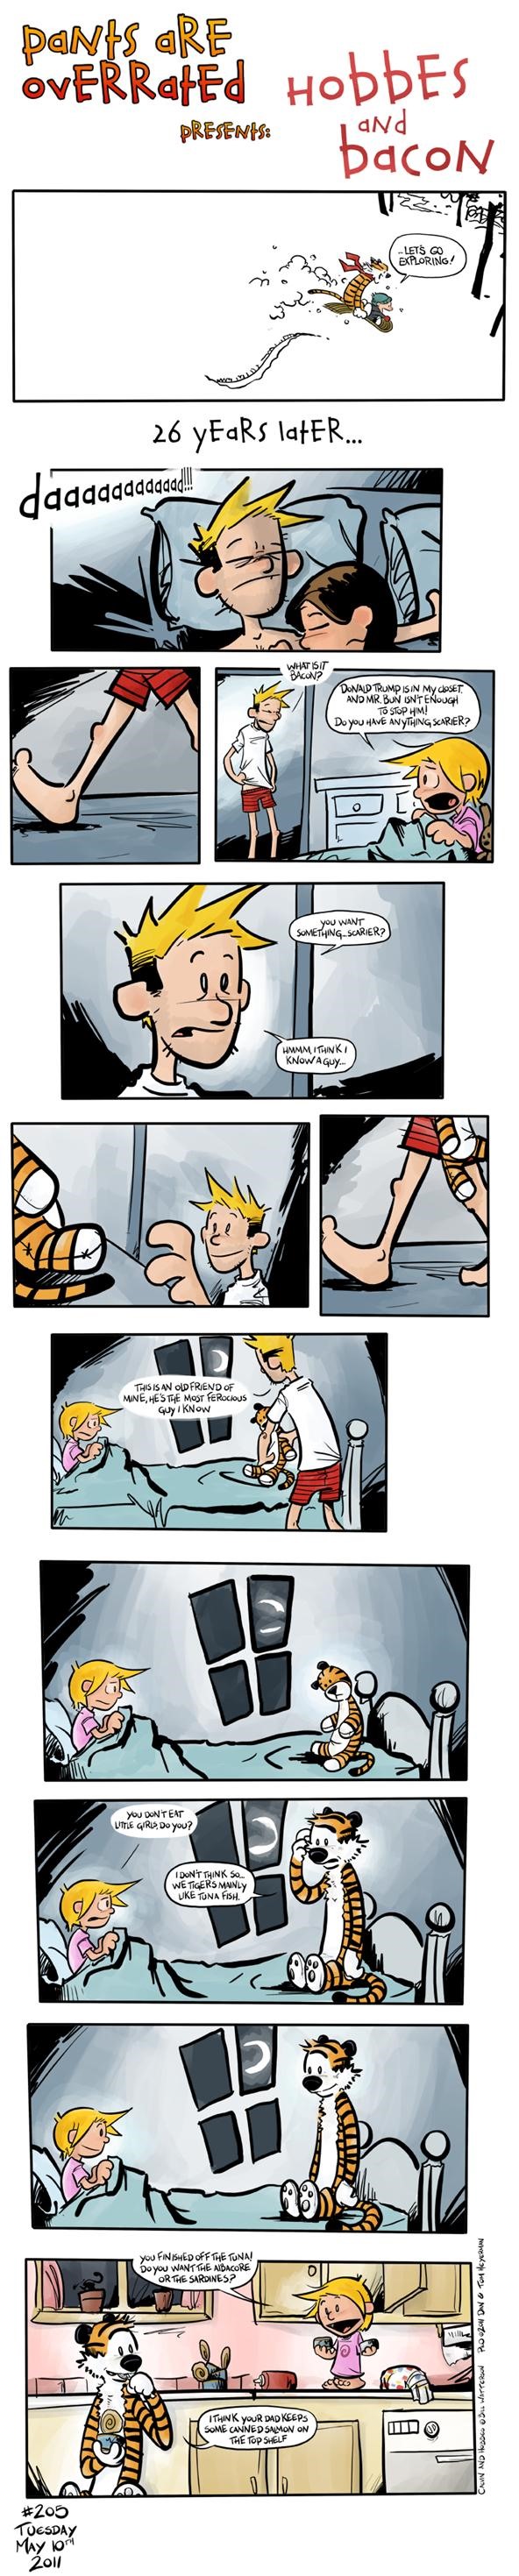 Pants Are Overrated: Calvin & Hobbes All Grown Up!